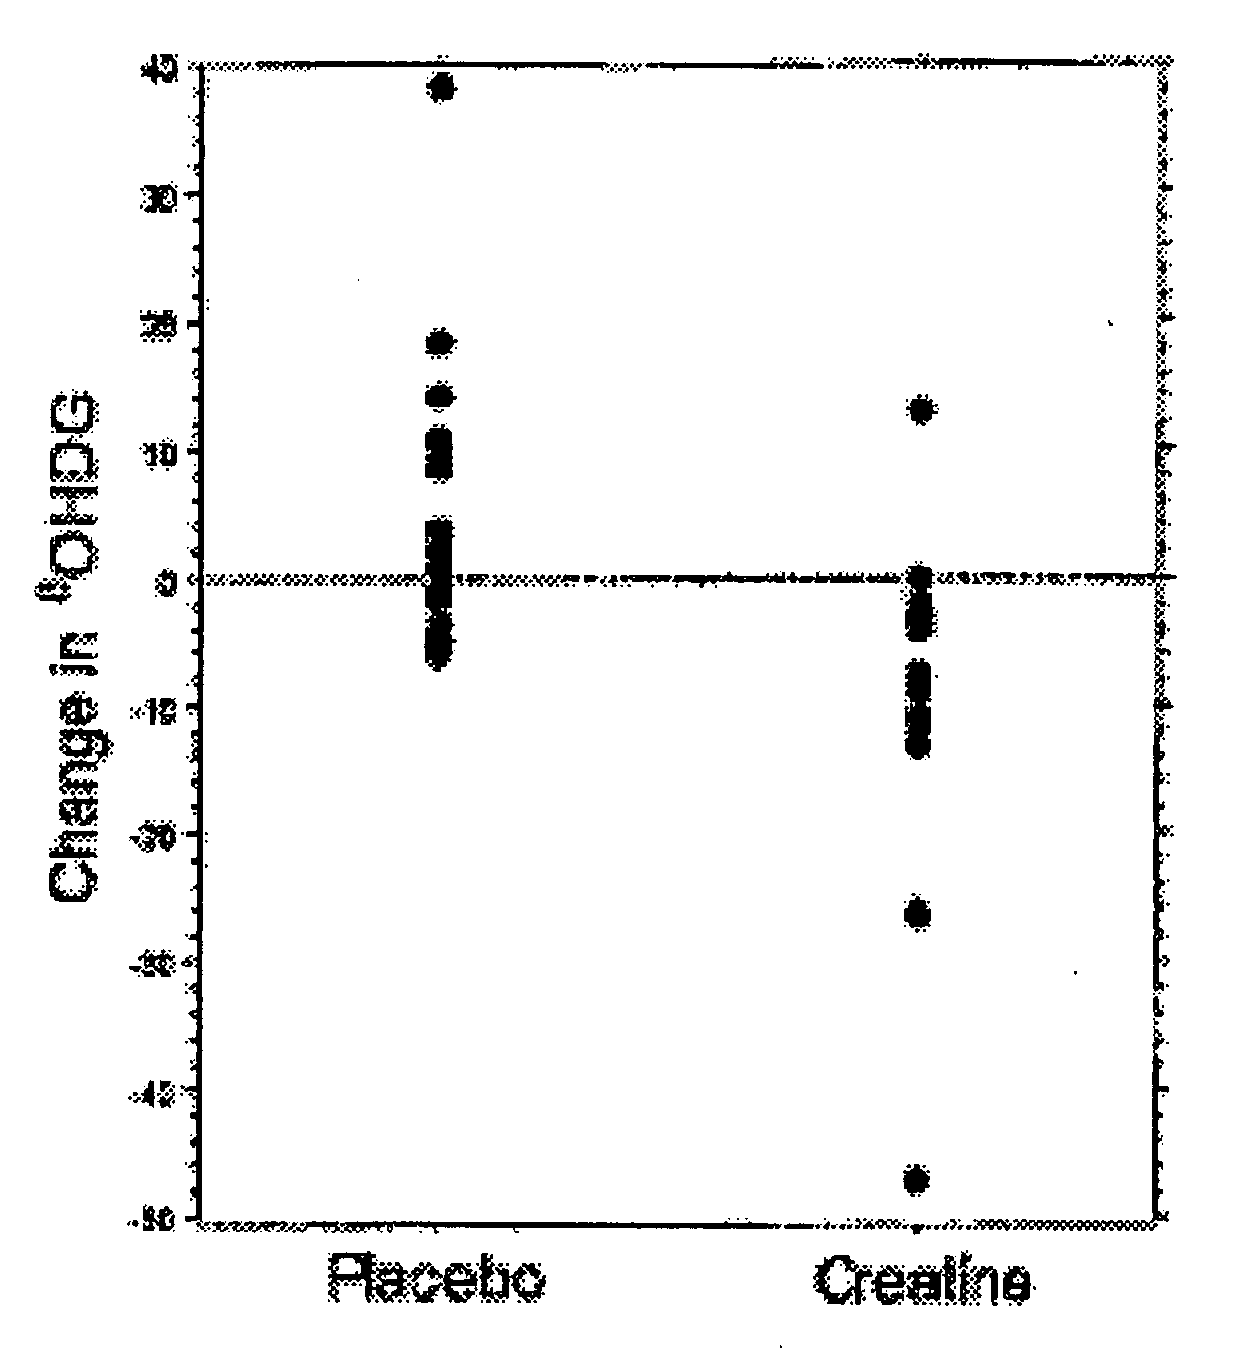 Methods of treating a neurological disorder with creatine monohydrate